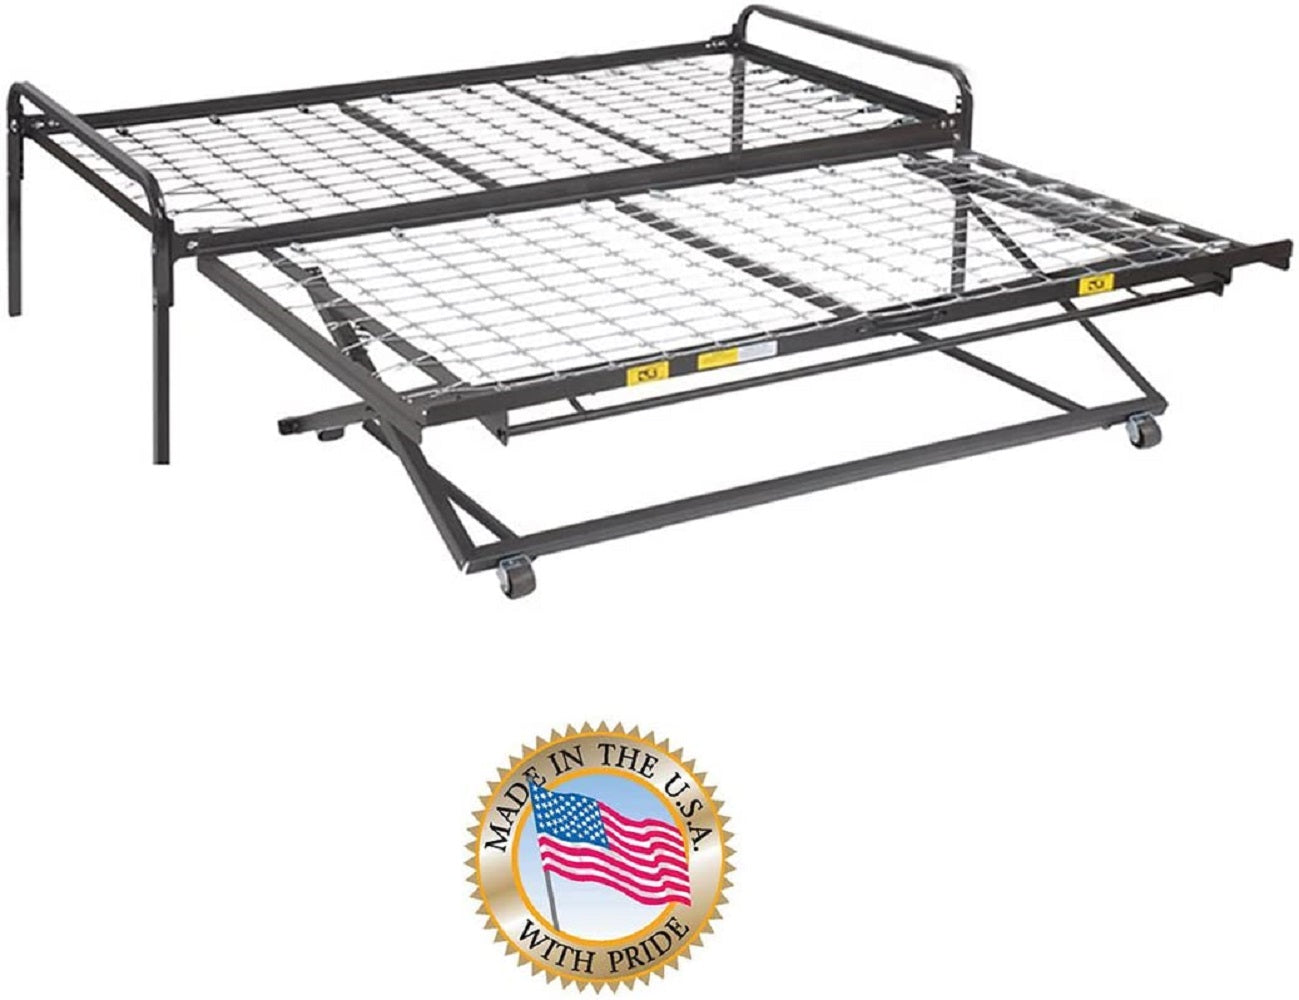 Twin Size Metal Day Bed (Daybed) Frame & Pop up Trundle with Upgraded Quality Mattresses Included Package Deal!